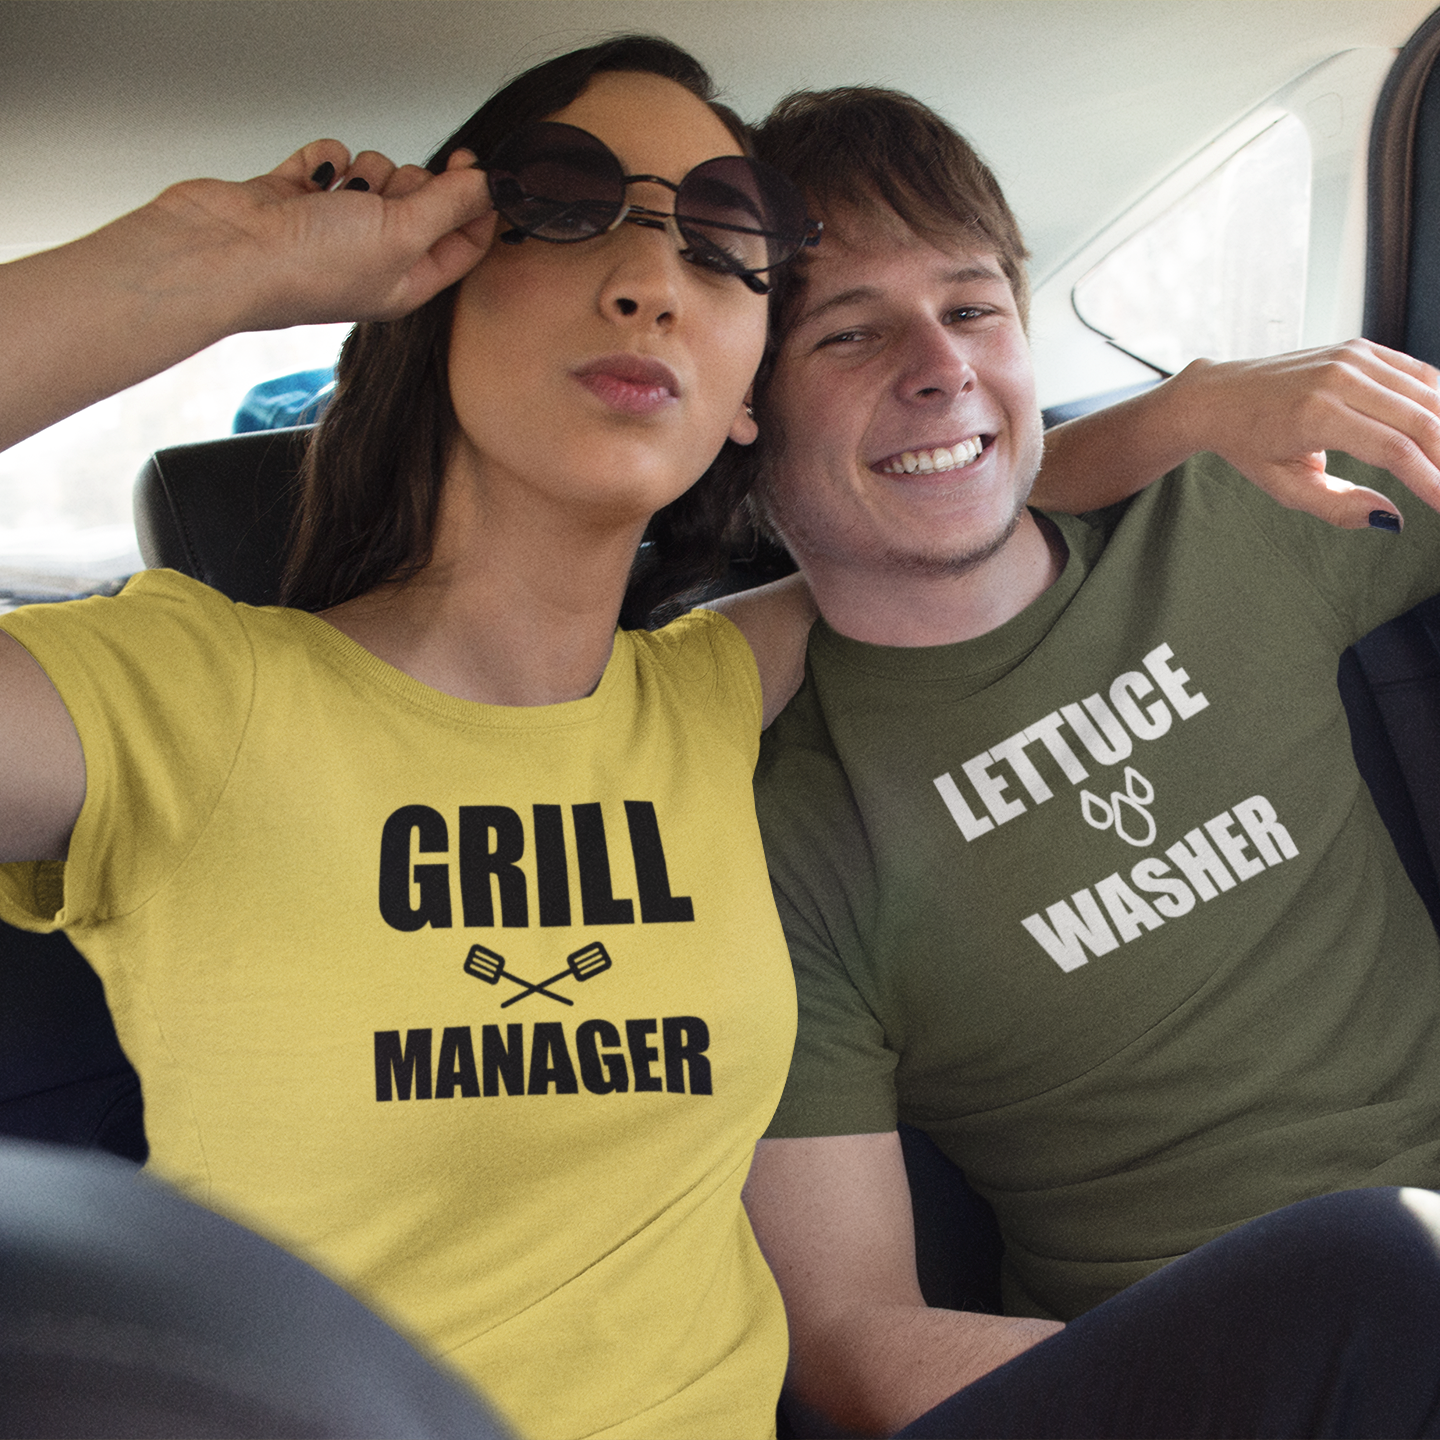 'Grill manager' adult shirt